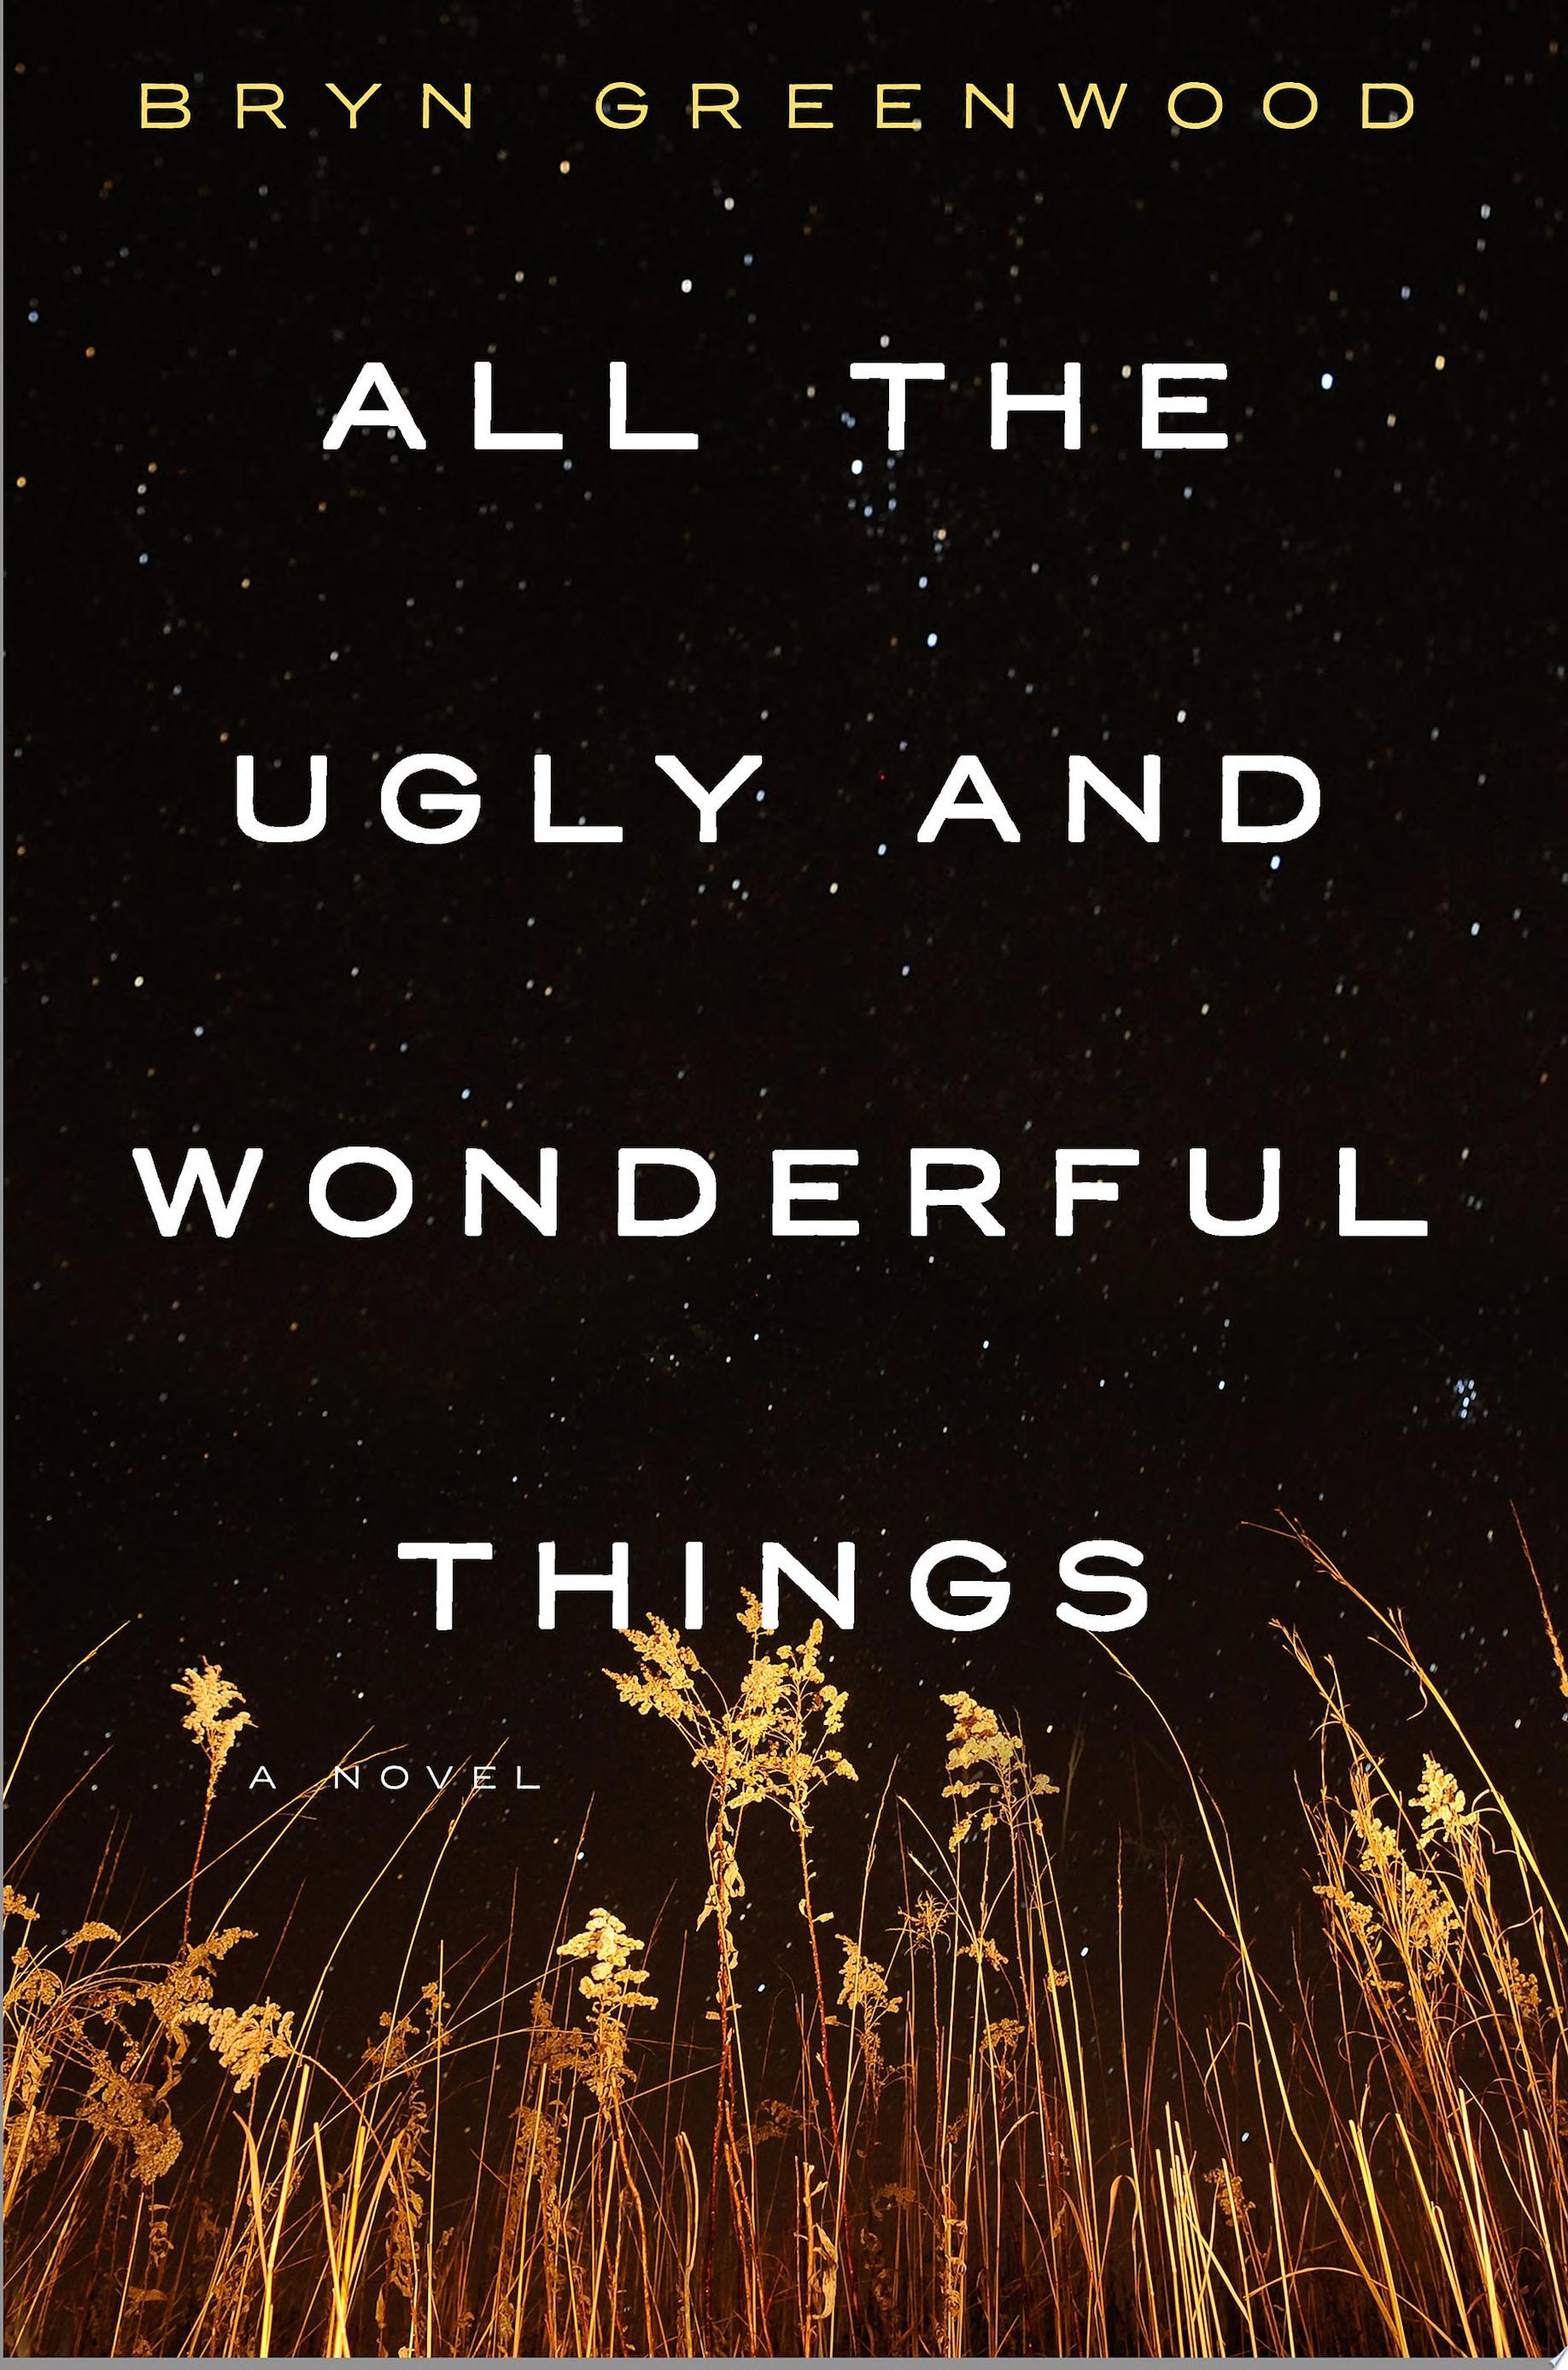 Image for "All the Ugly and Wonderful Things"